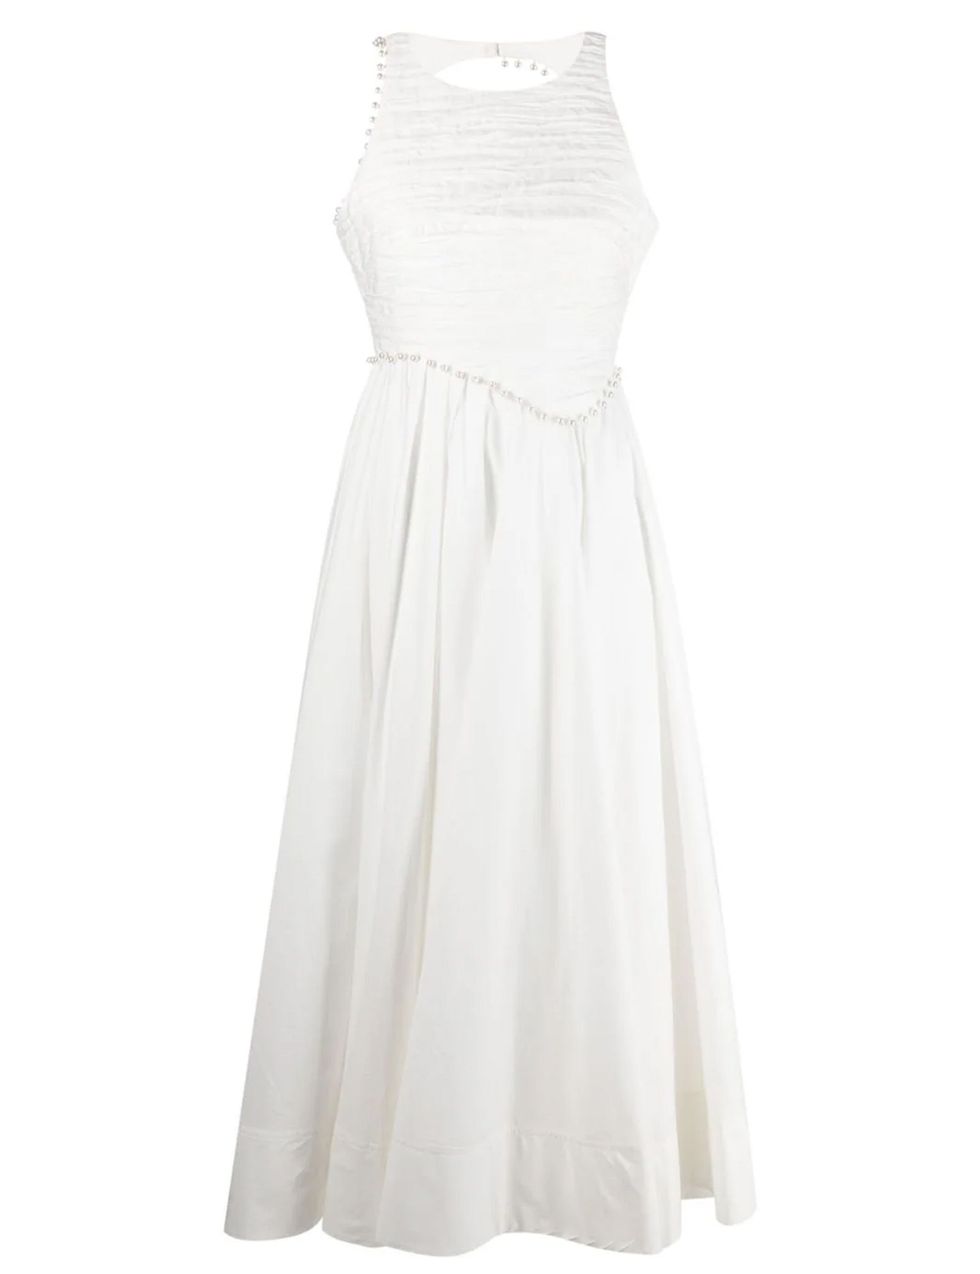 10 chic white dresses to add to your summer wardrobe